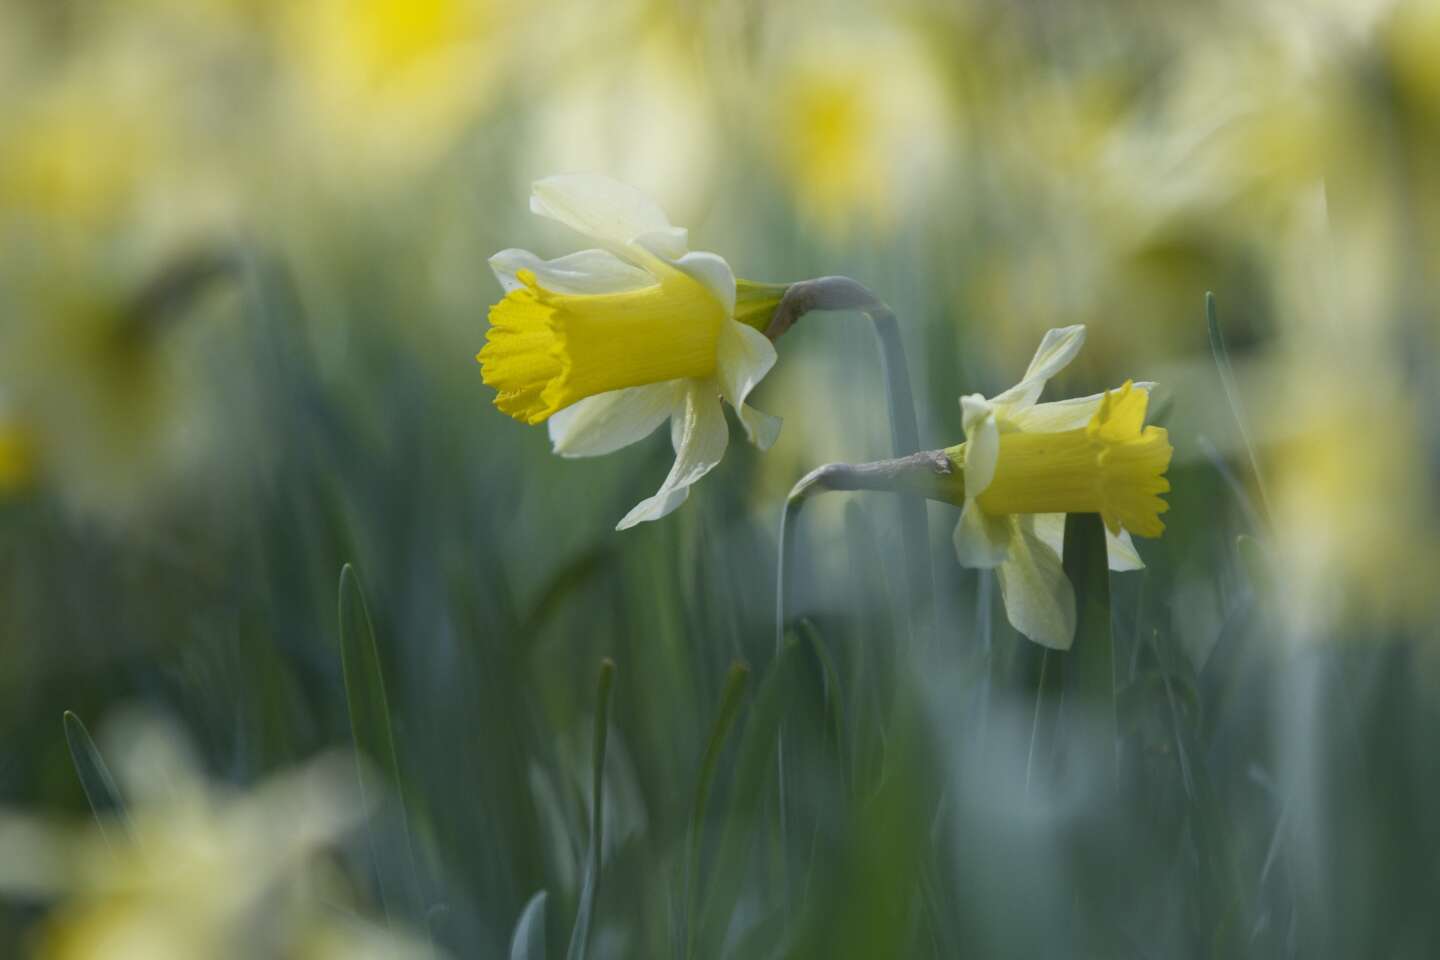 Only the wind turns the heads of the narcissus